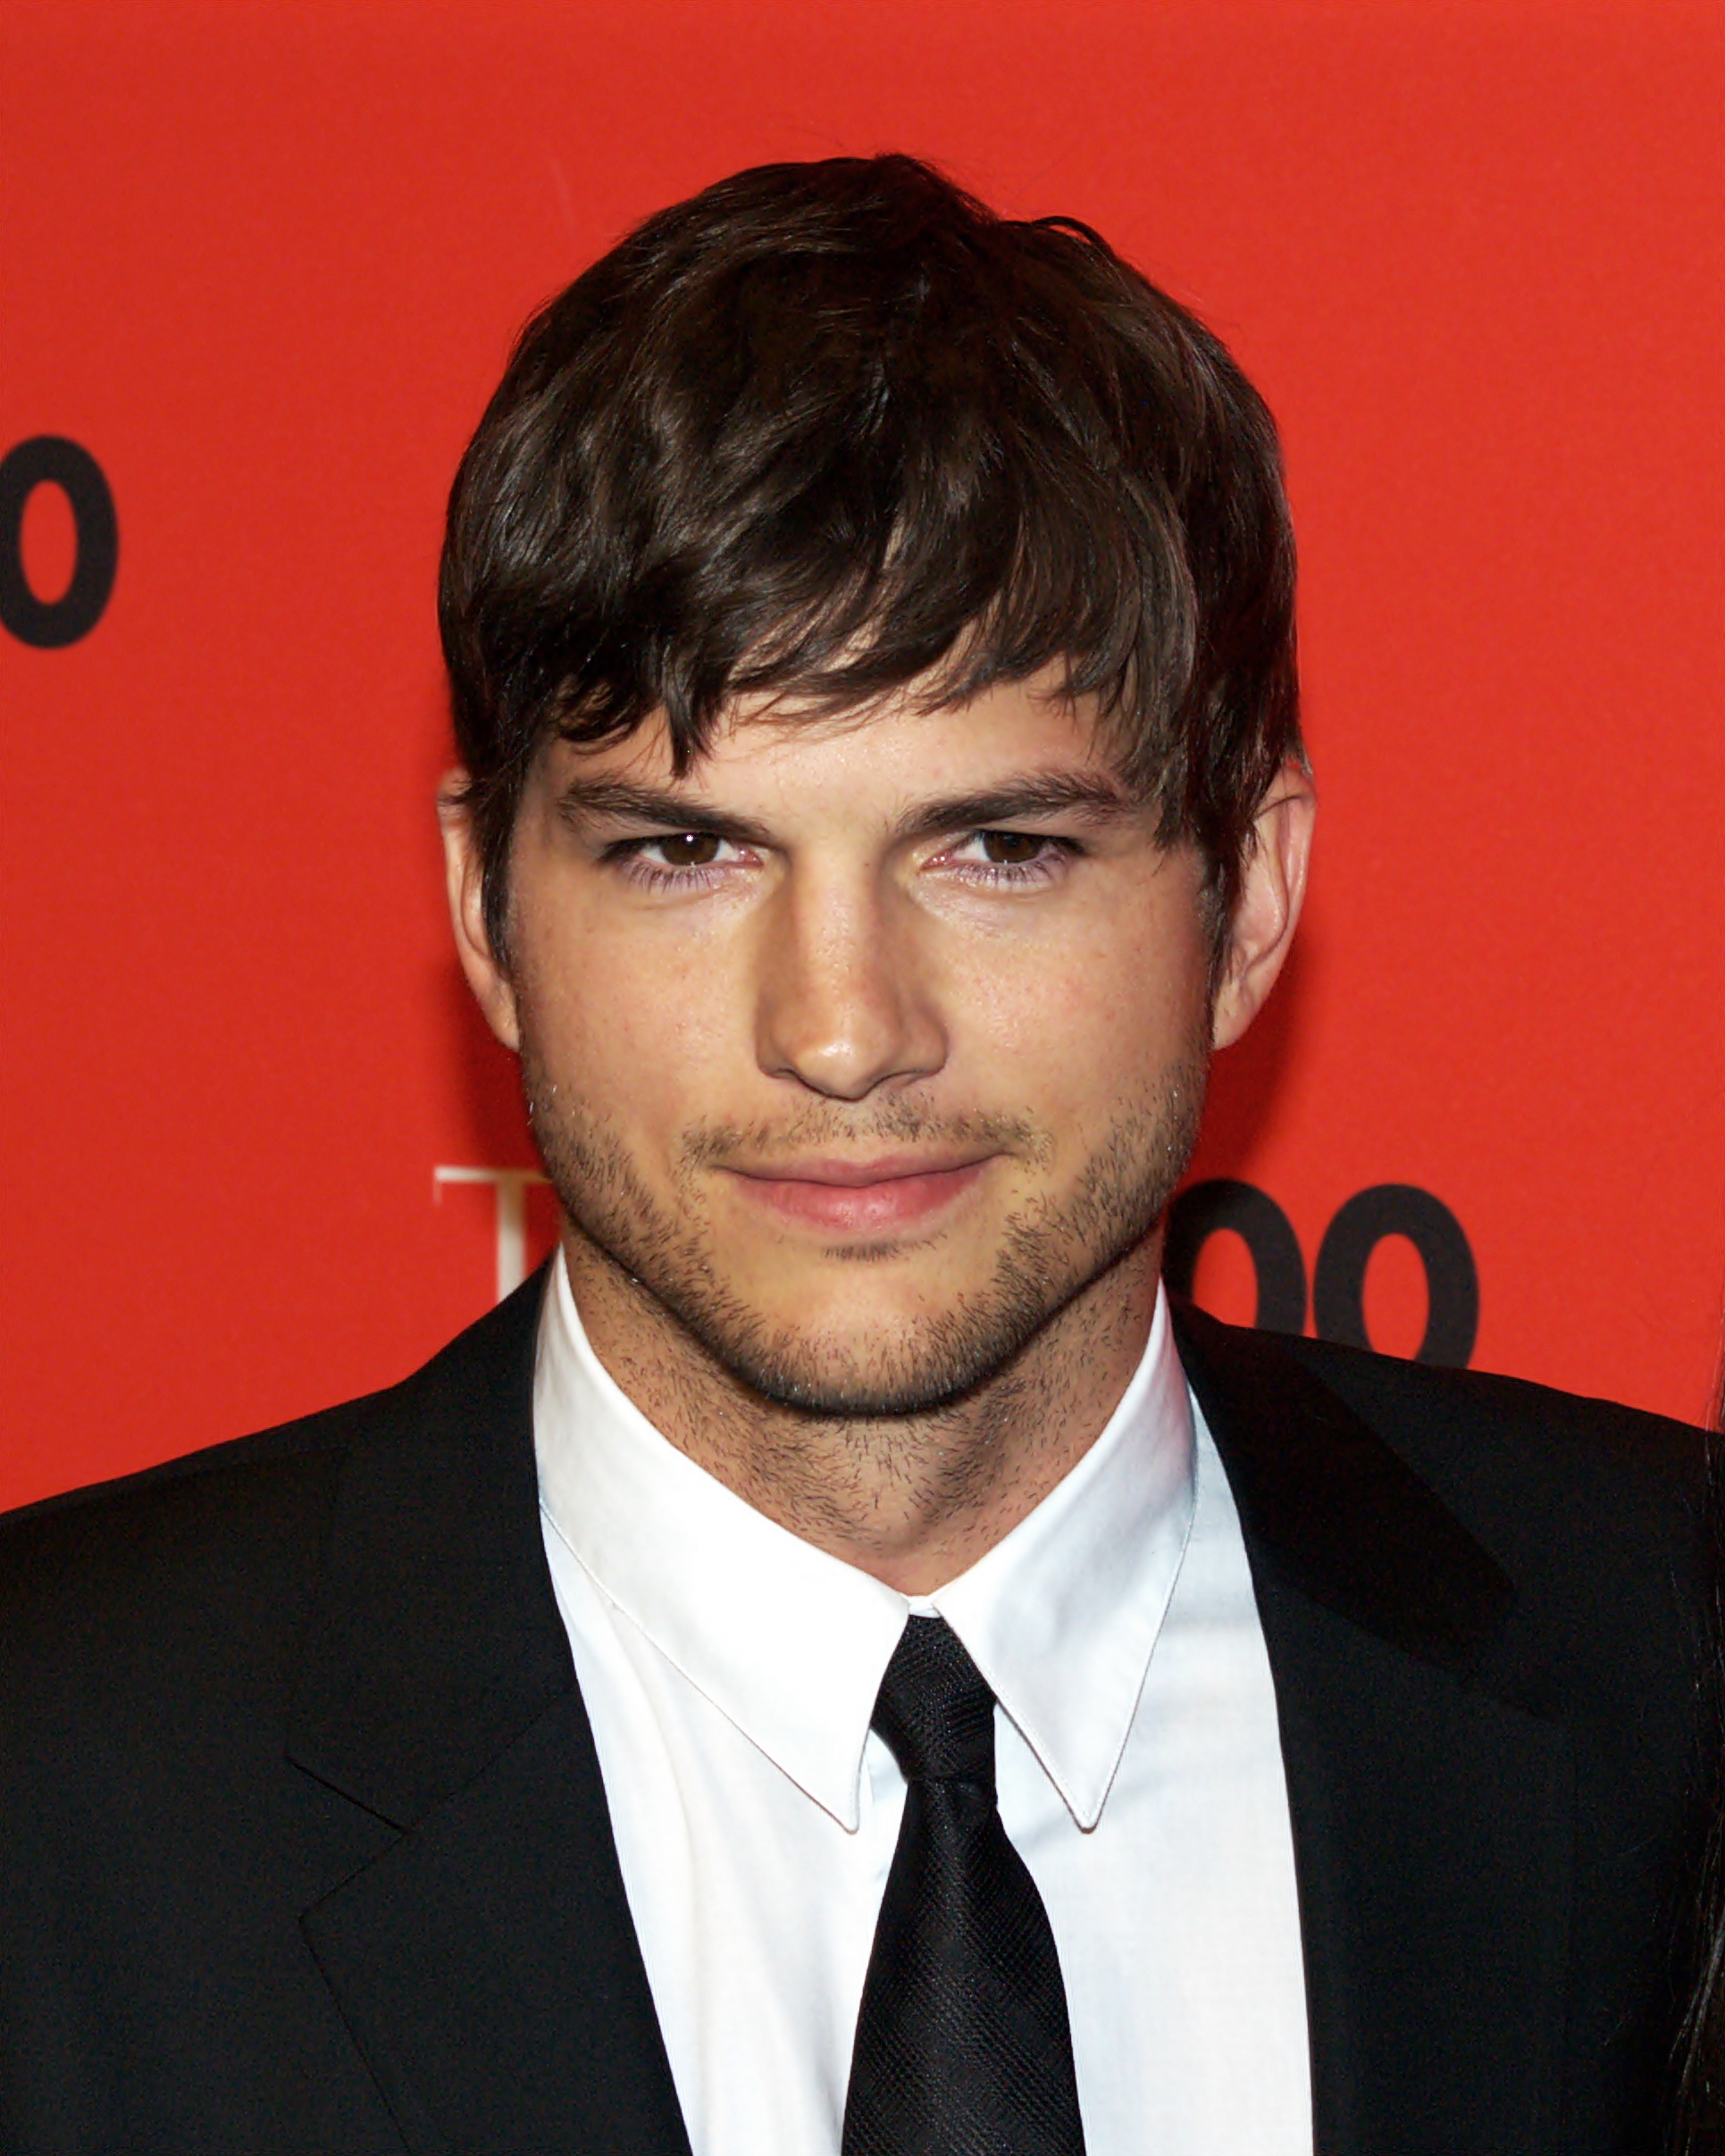 Ashton Kutcher had 'rare form of vasculitis' episode 3 yrs ago, actor says fully recovered now